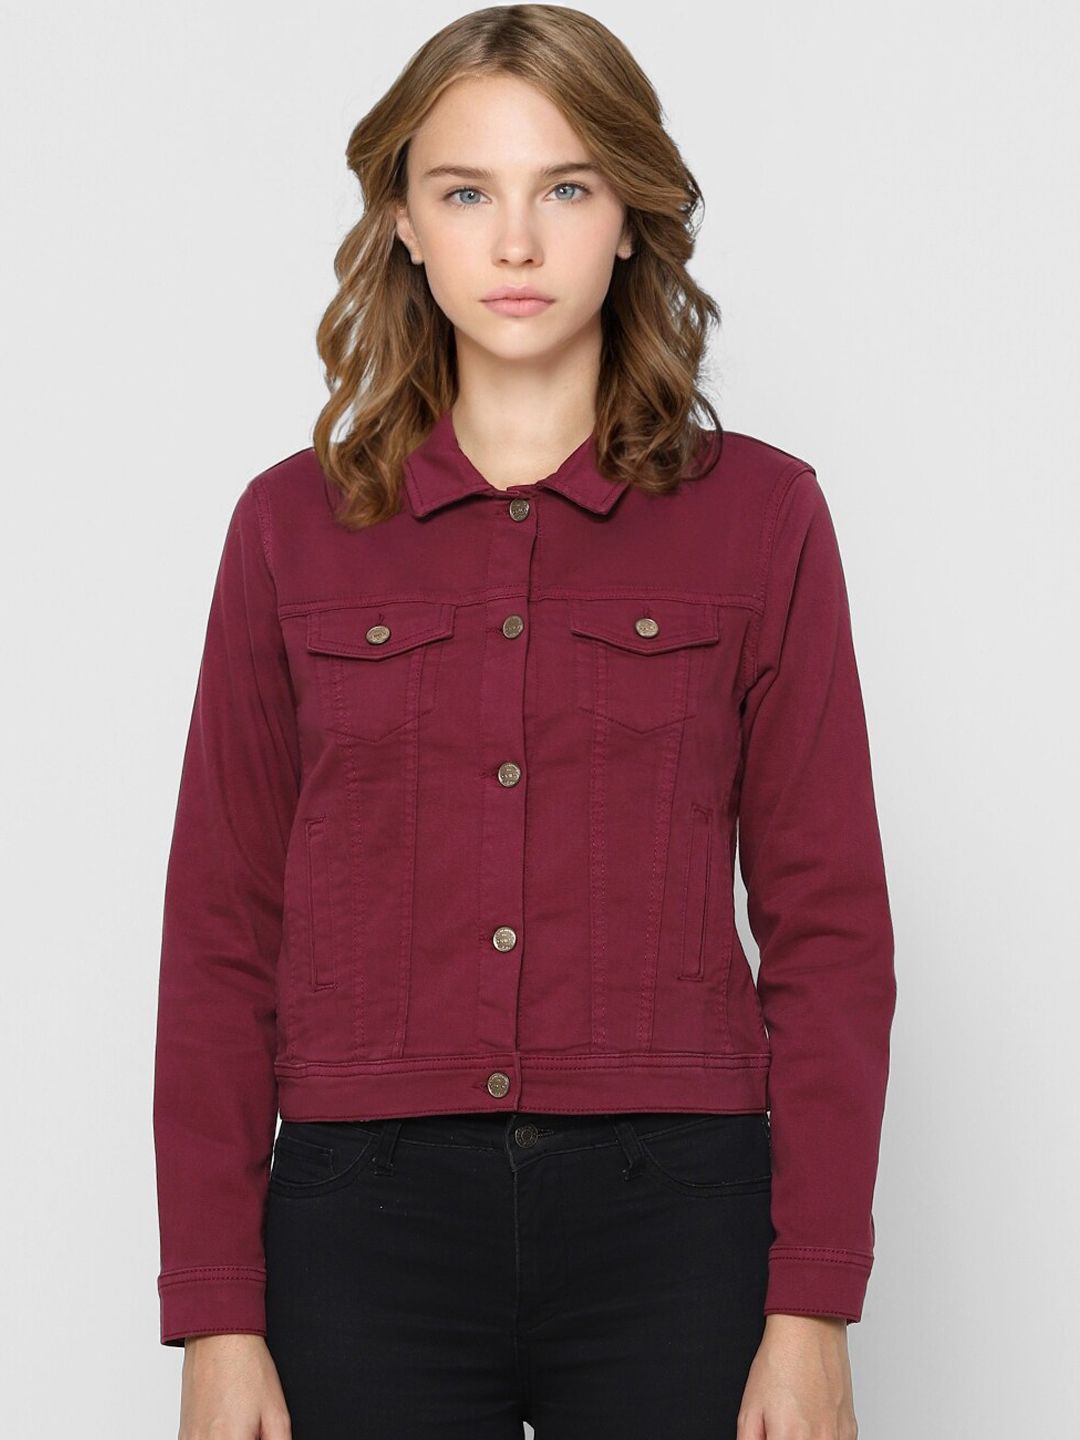 ONLY Women Purple Tailored Jacket Price in India